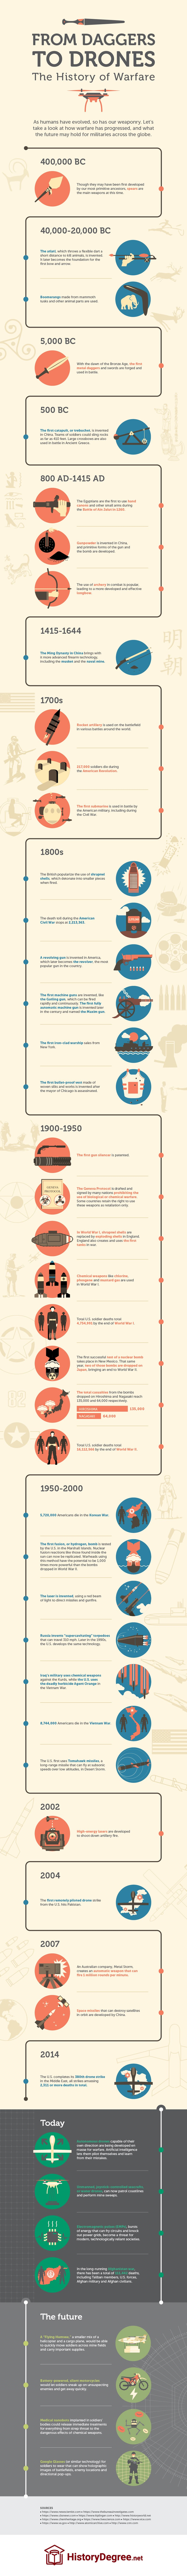 From Daggers To Drones: The History Of Warfare #Infographic